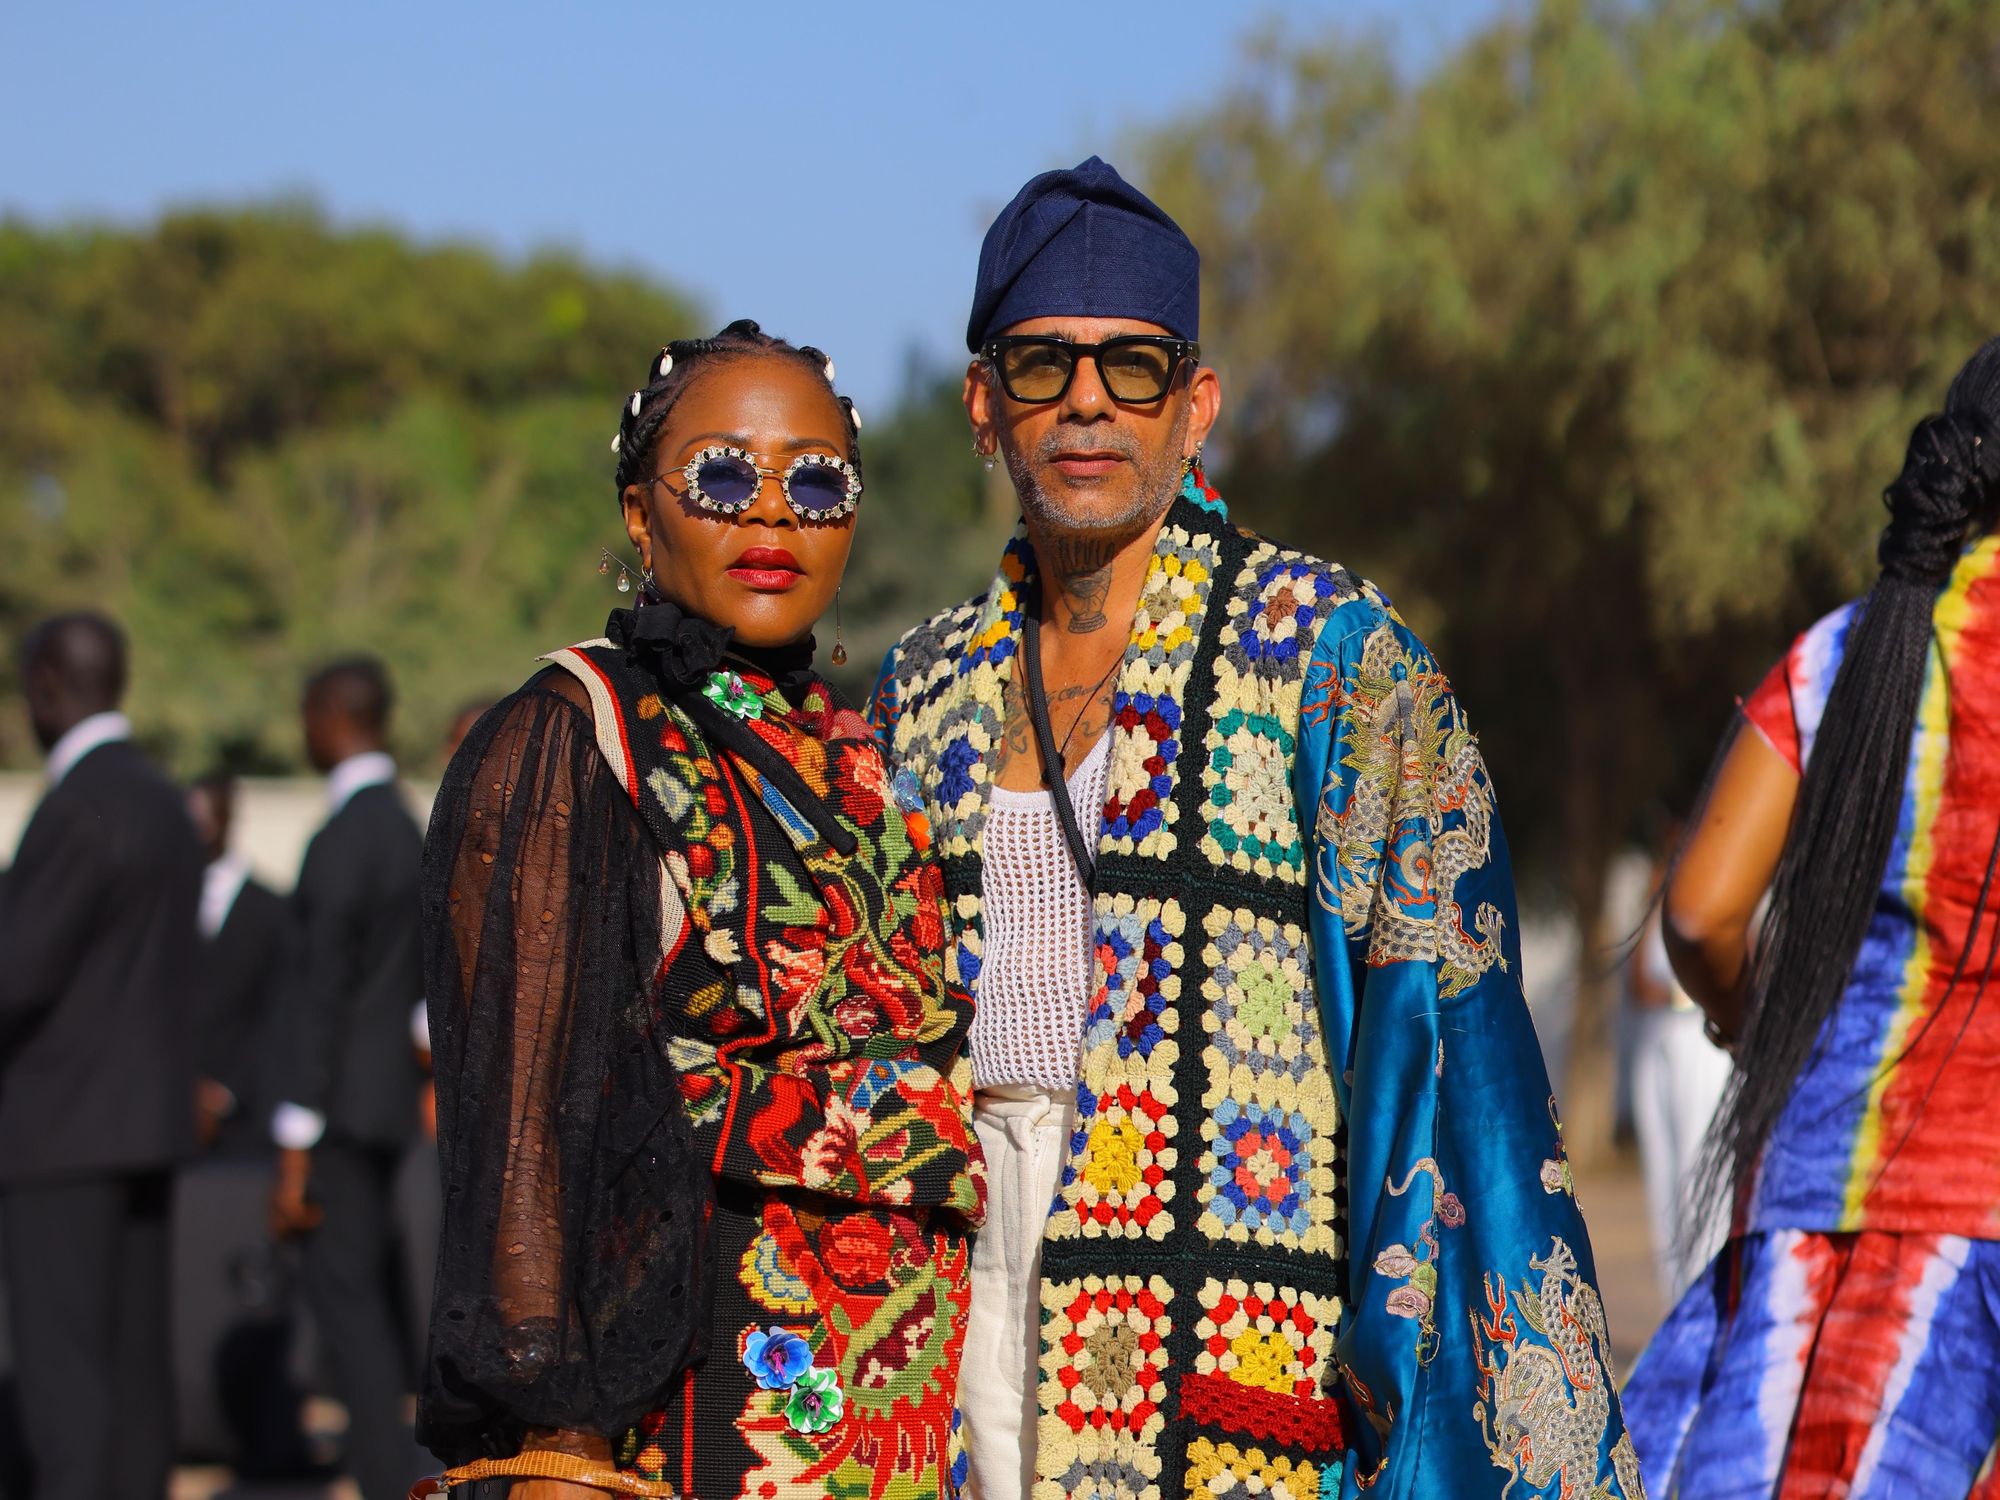 The Best Street Style from Chanel’s Debut Show in Dakar